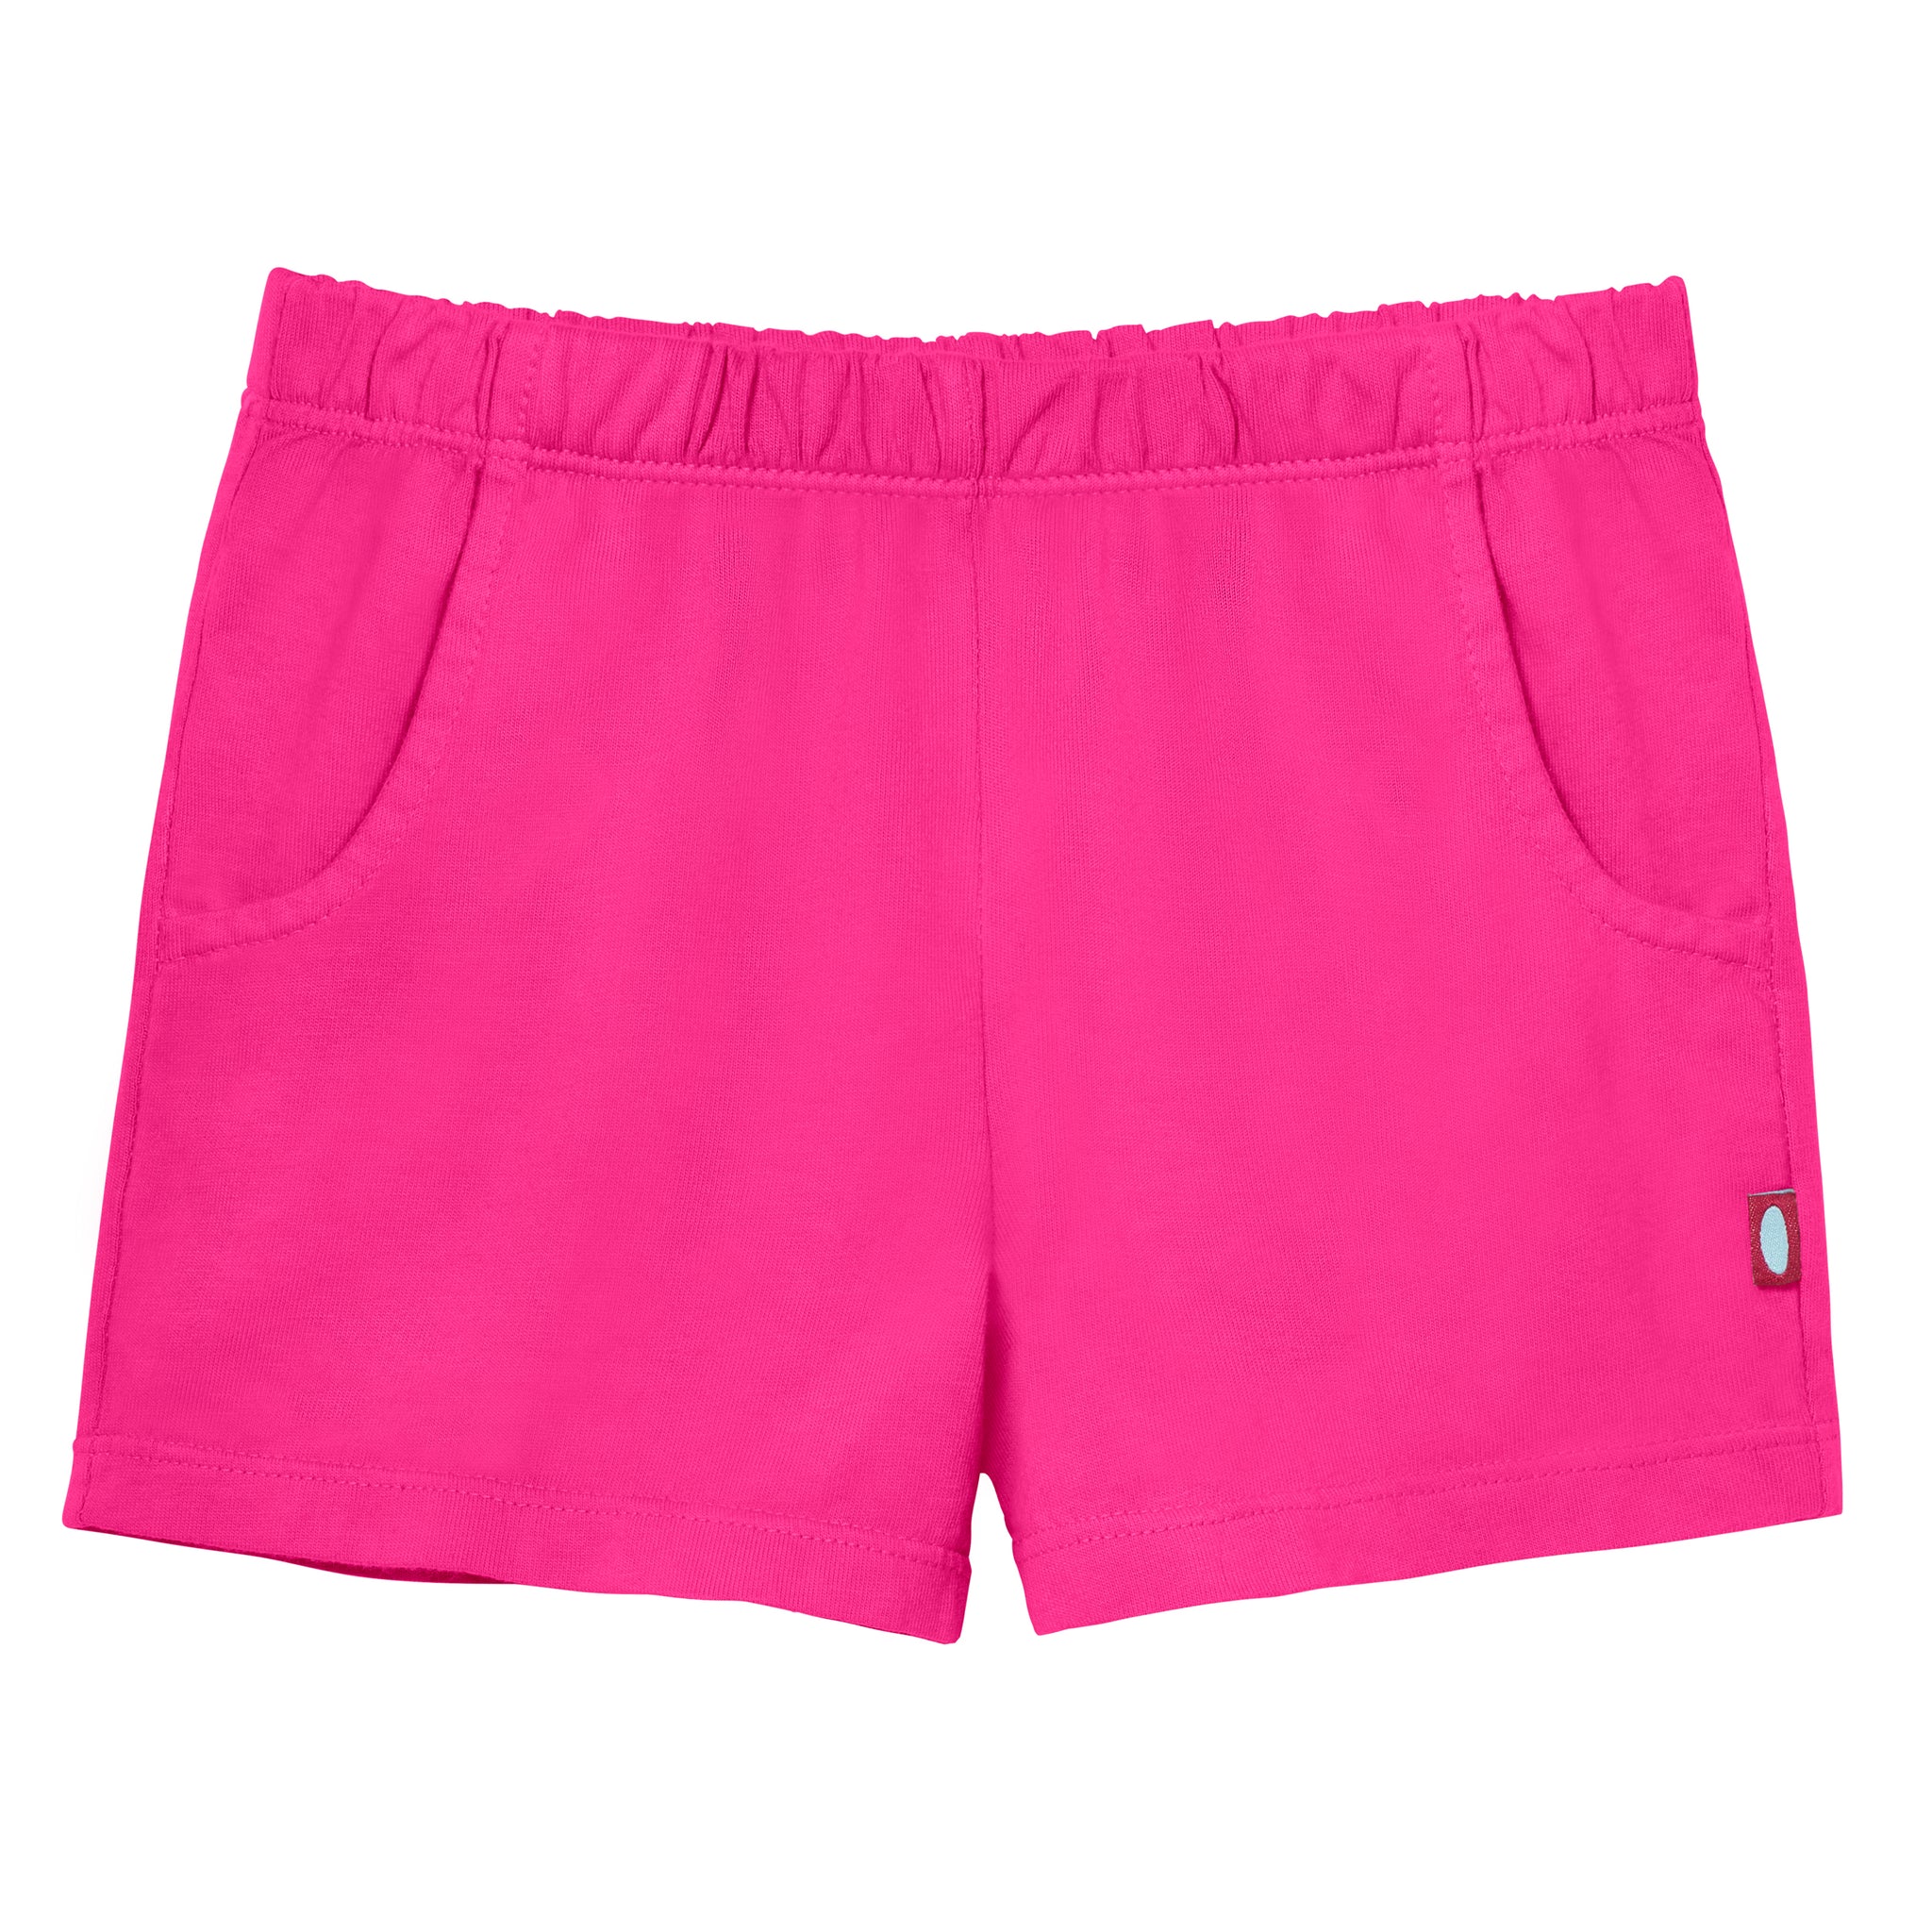 Shorts for Girls - Buy Girls Shorts Pants Online in Canada